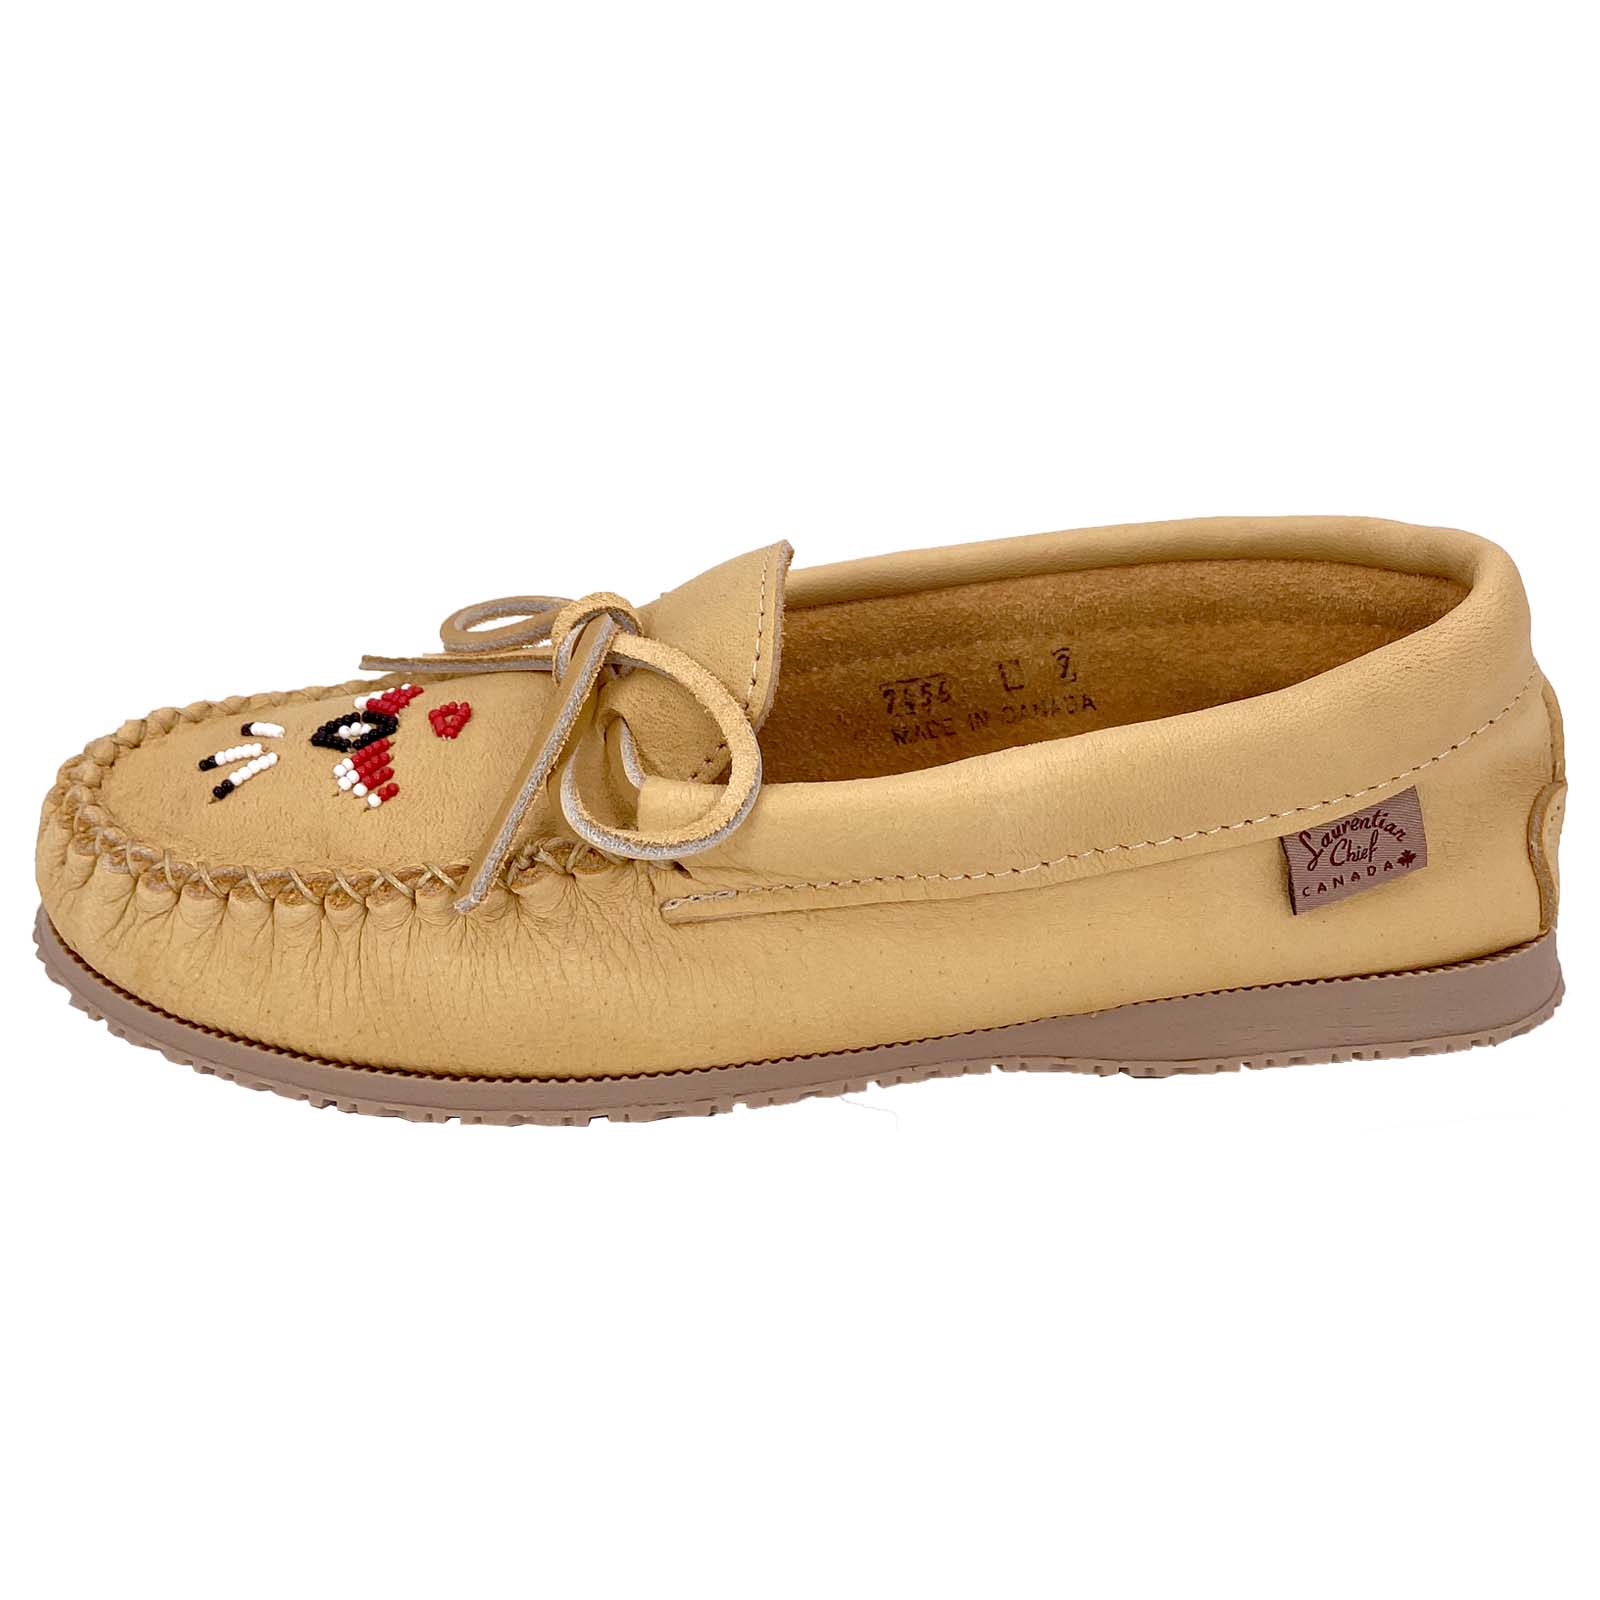 Women's Moose Hide Leather Beaded Moccasin Shoes